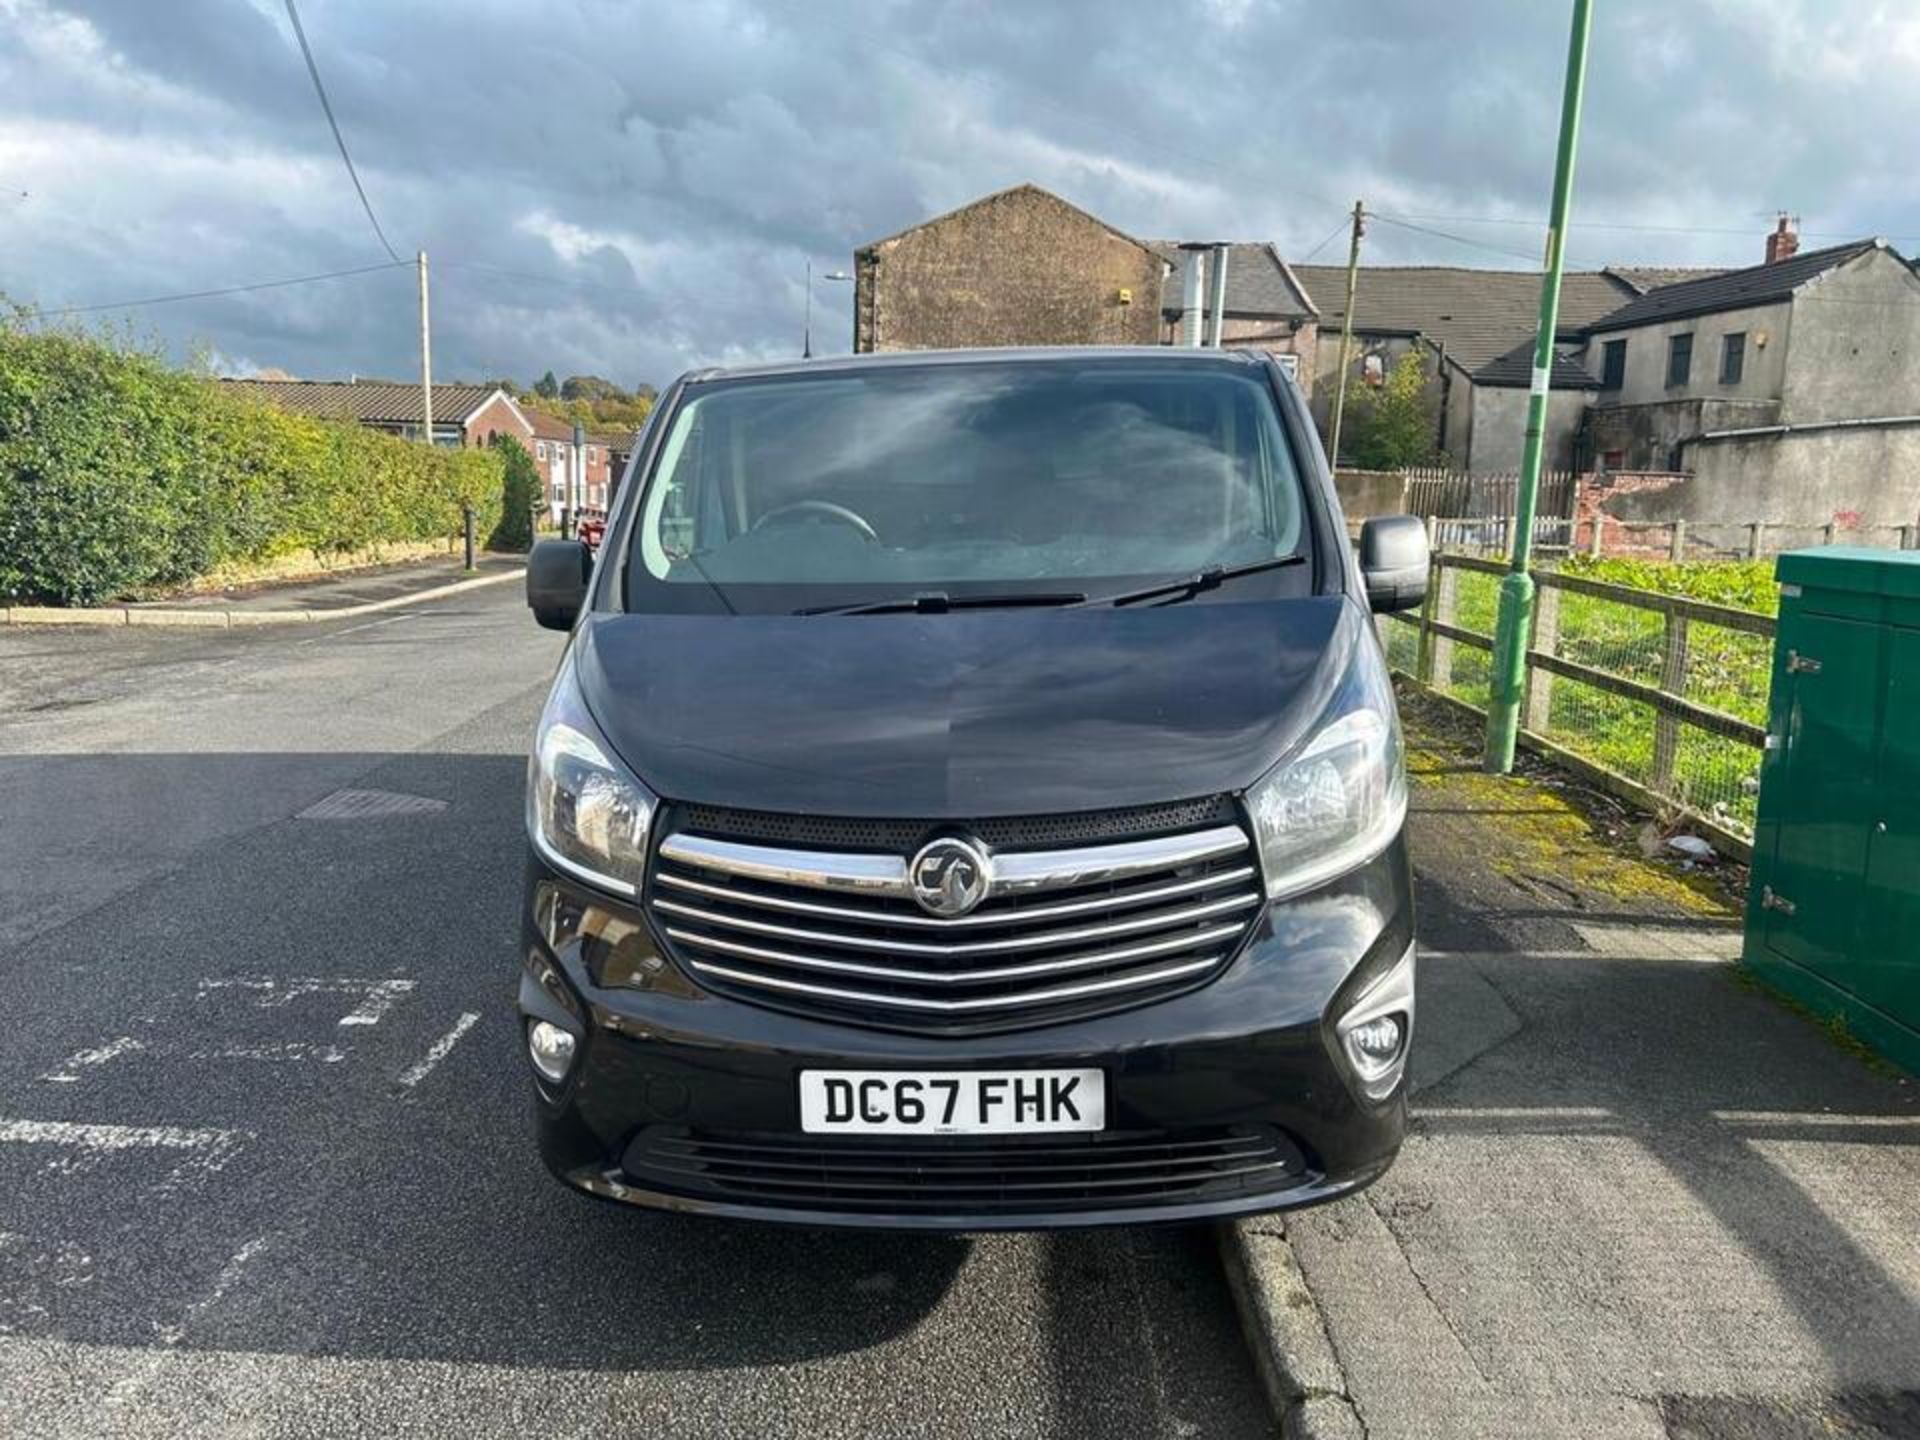 2018 VAUXHALL VIVARO SPORTIVE -128K MILES- HPI CLEAR - READY FOR ADVENTURE! - Image 10 of 11